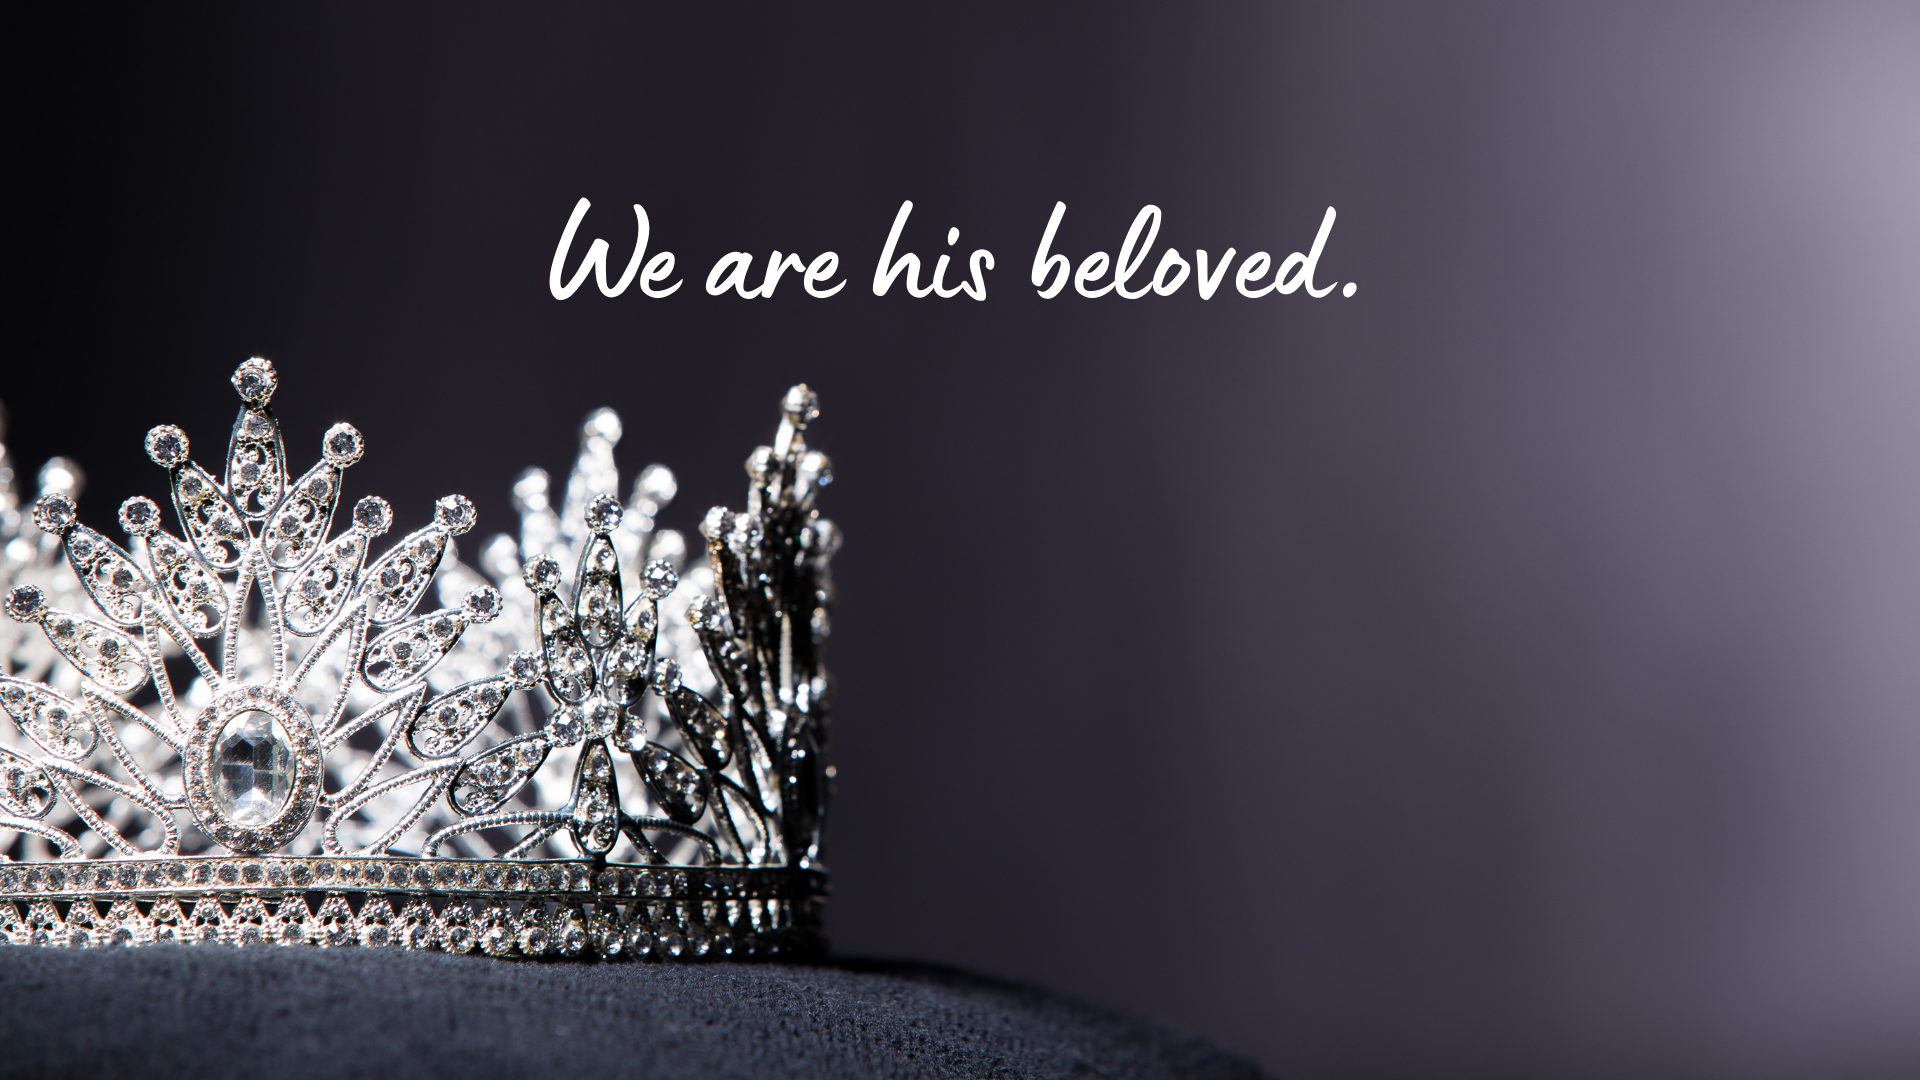 jesus gives a crown of righteousness